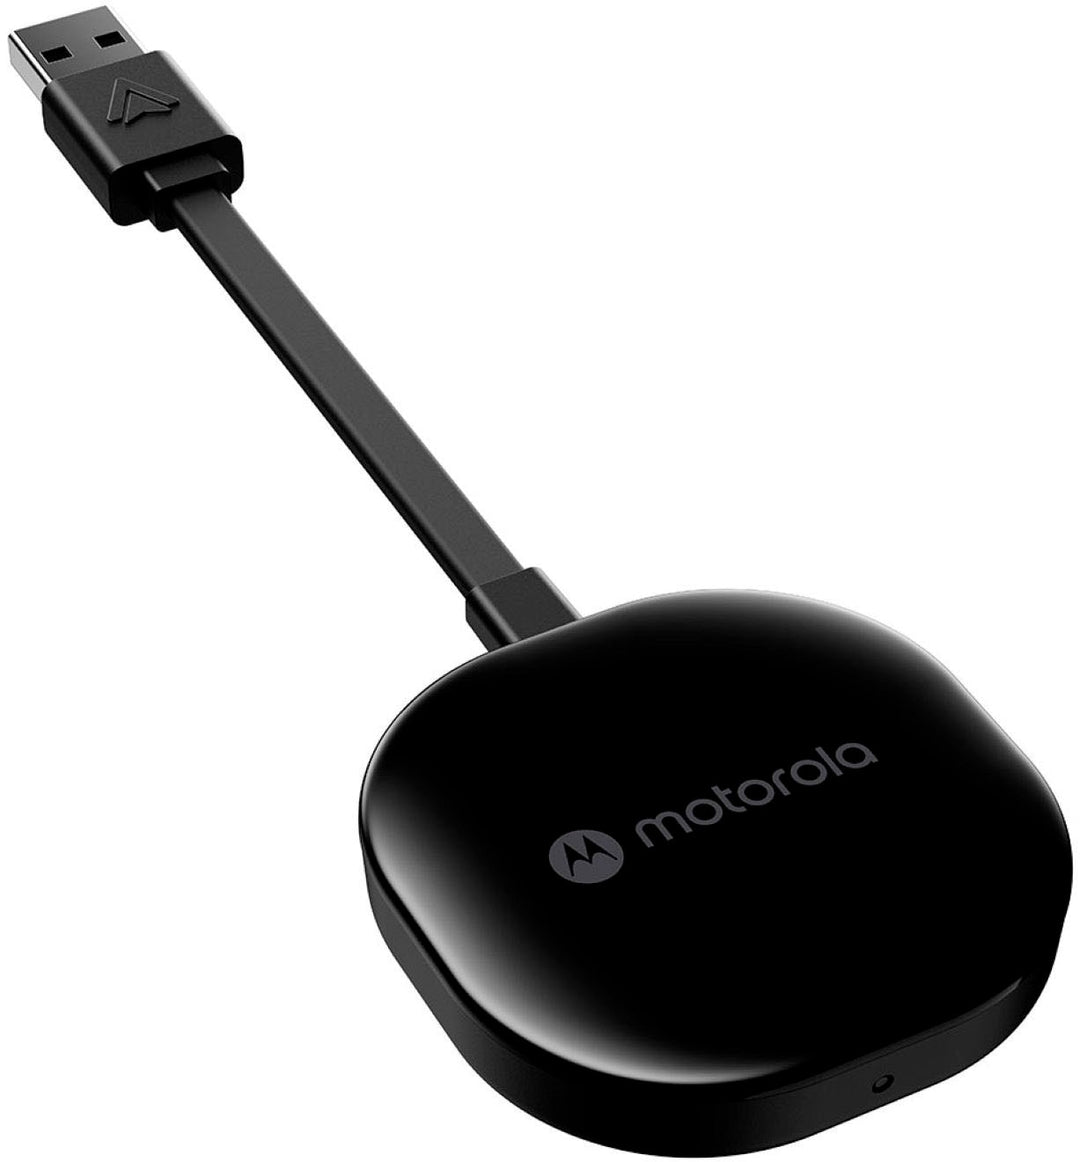 Motorola - Wireless Car Adapter for Android Auto - Black_4